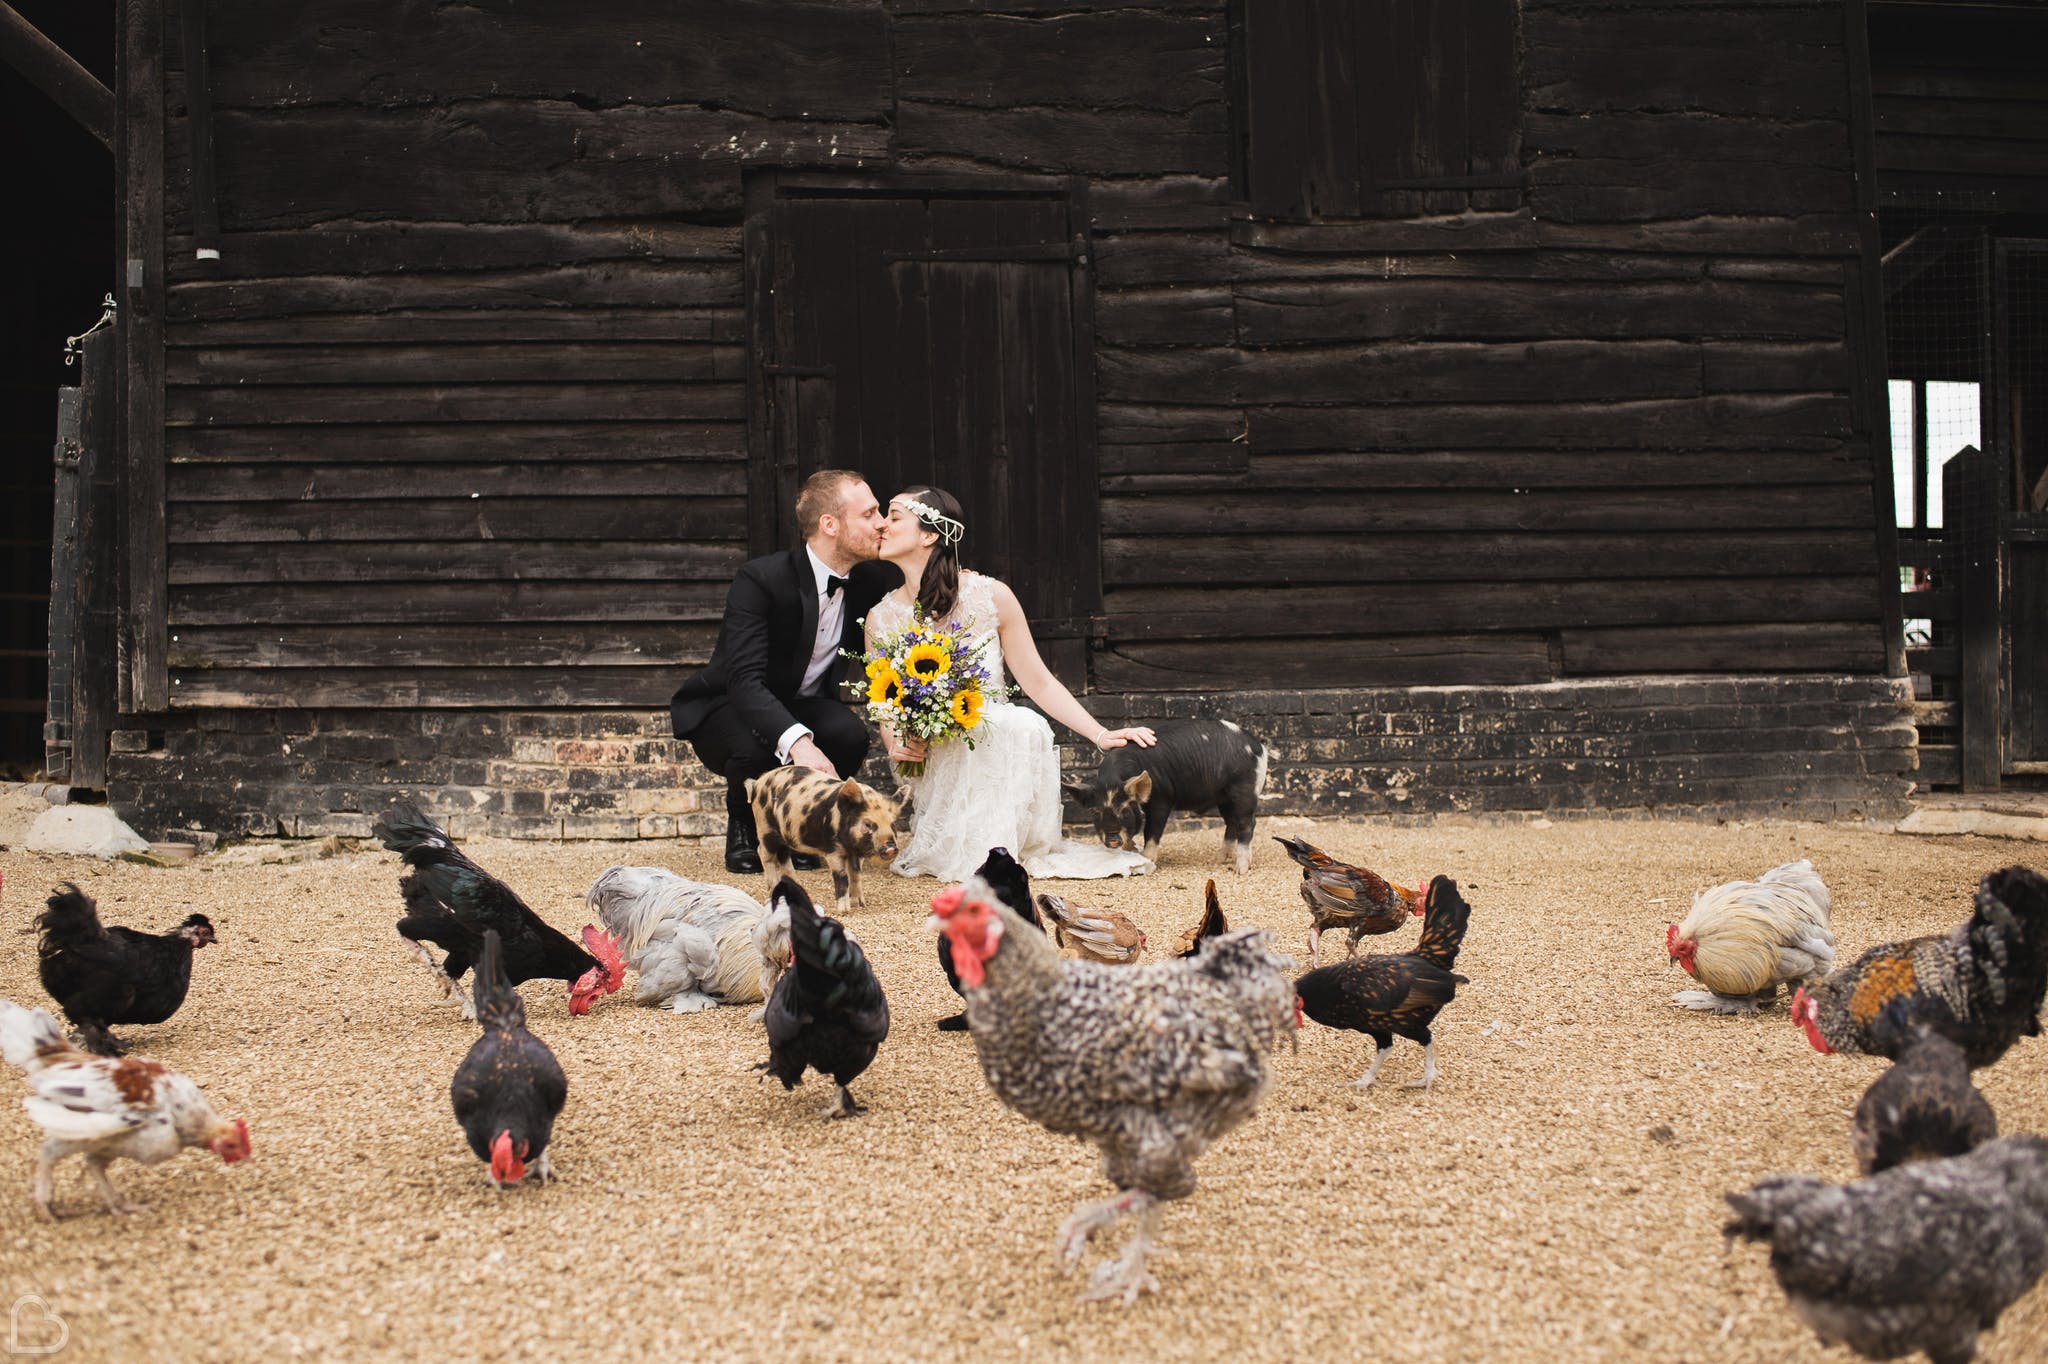 couple surrounded by chickens at south farm a farm wedding venue in the uk 